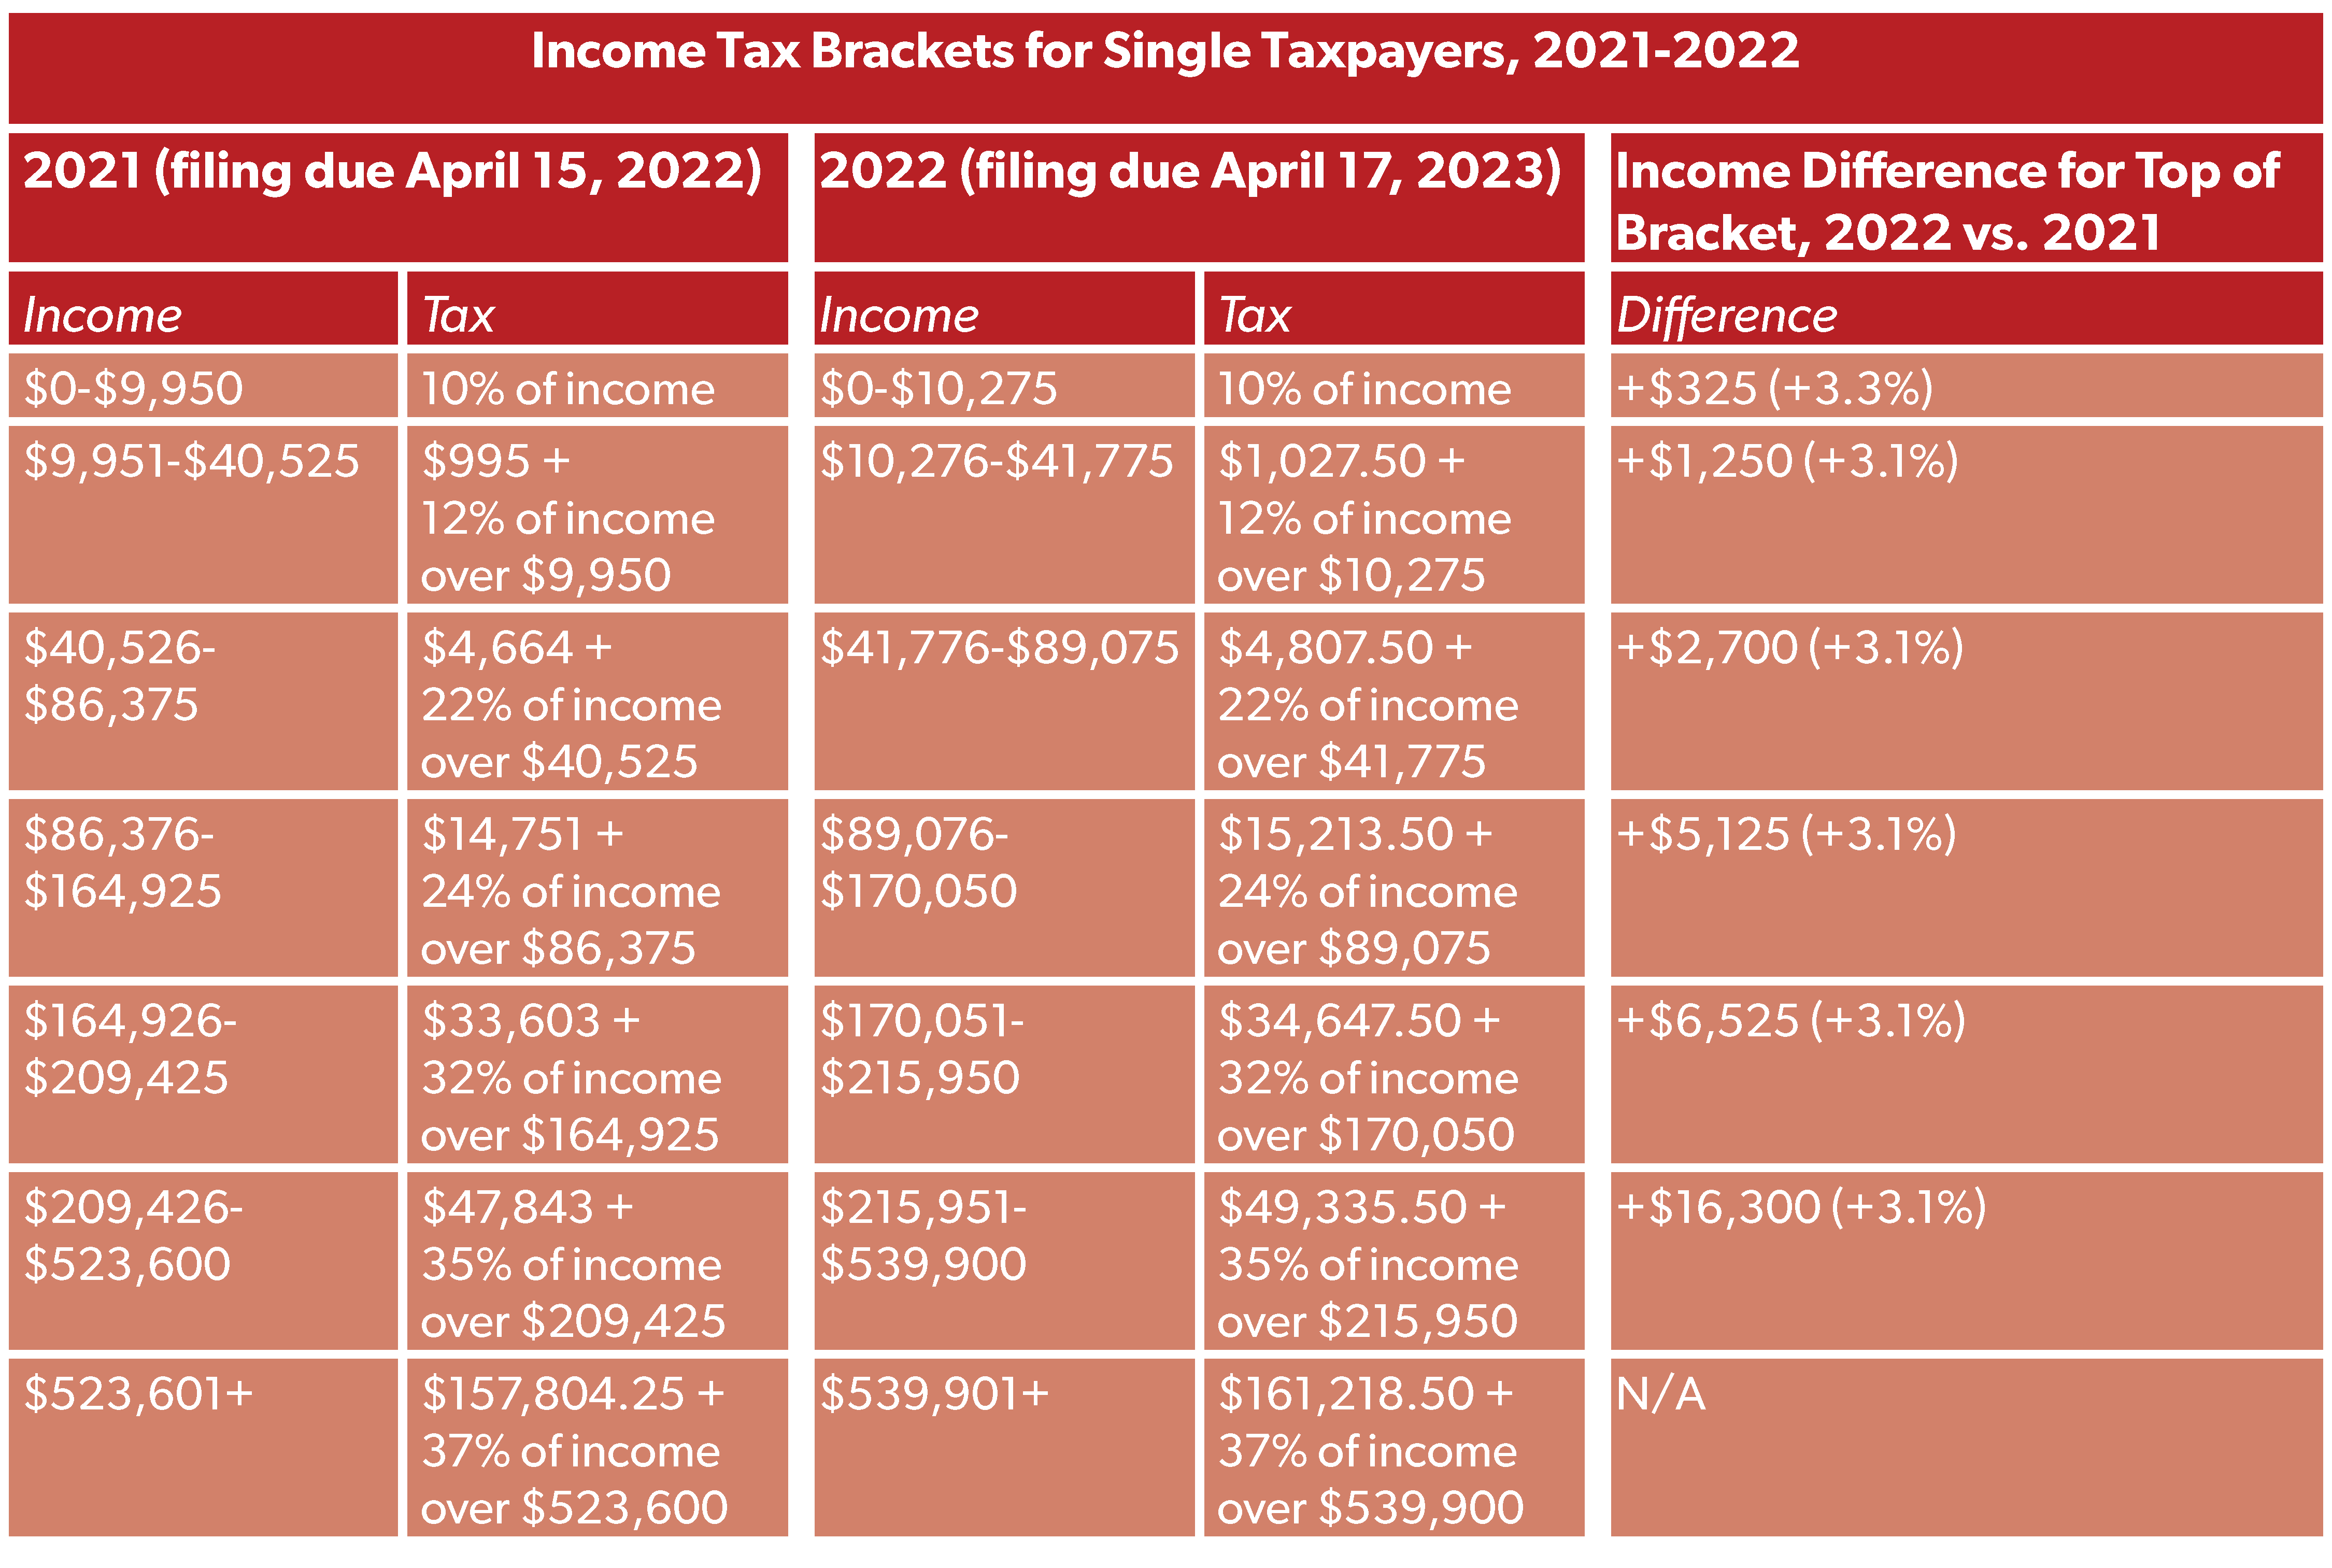 2022 Federal Tax Brackets And Standard Deduction Printable Form